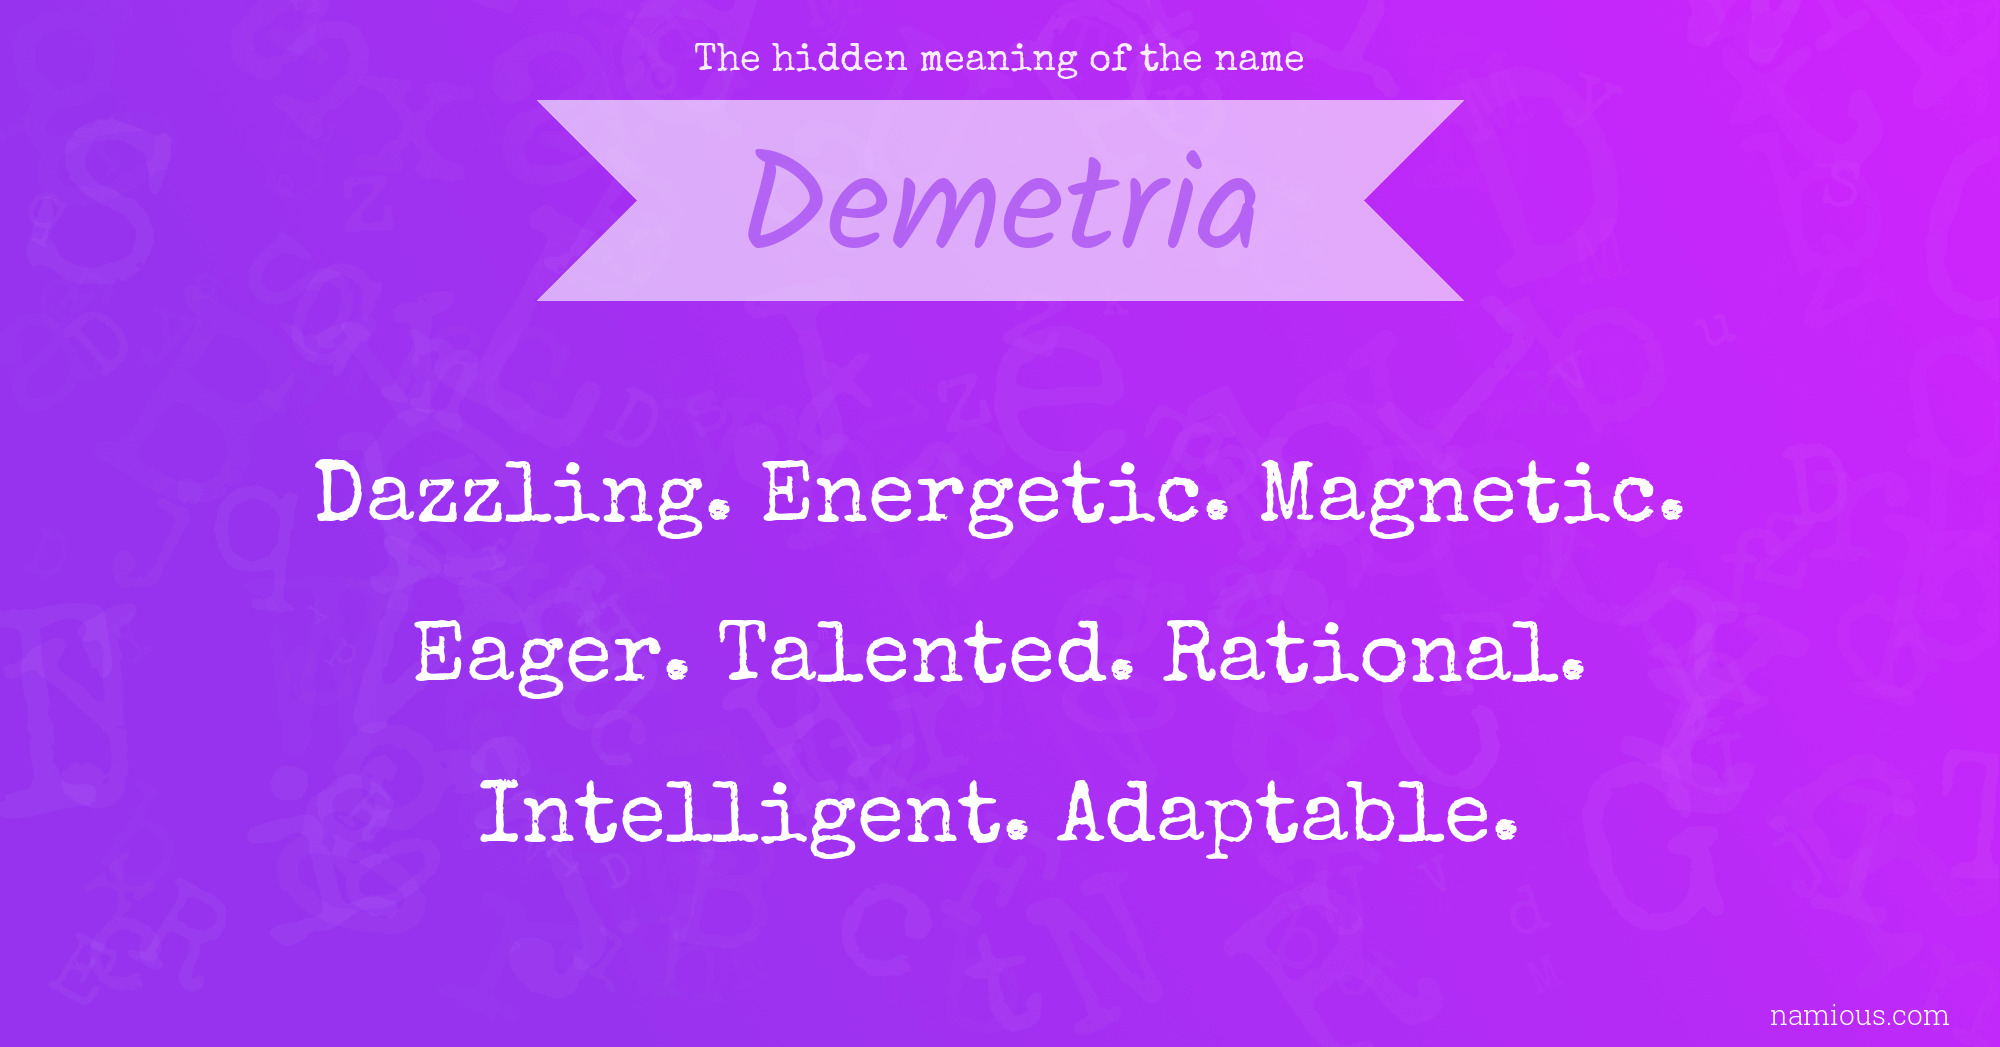 The hidden meaning of the name Demetria